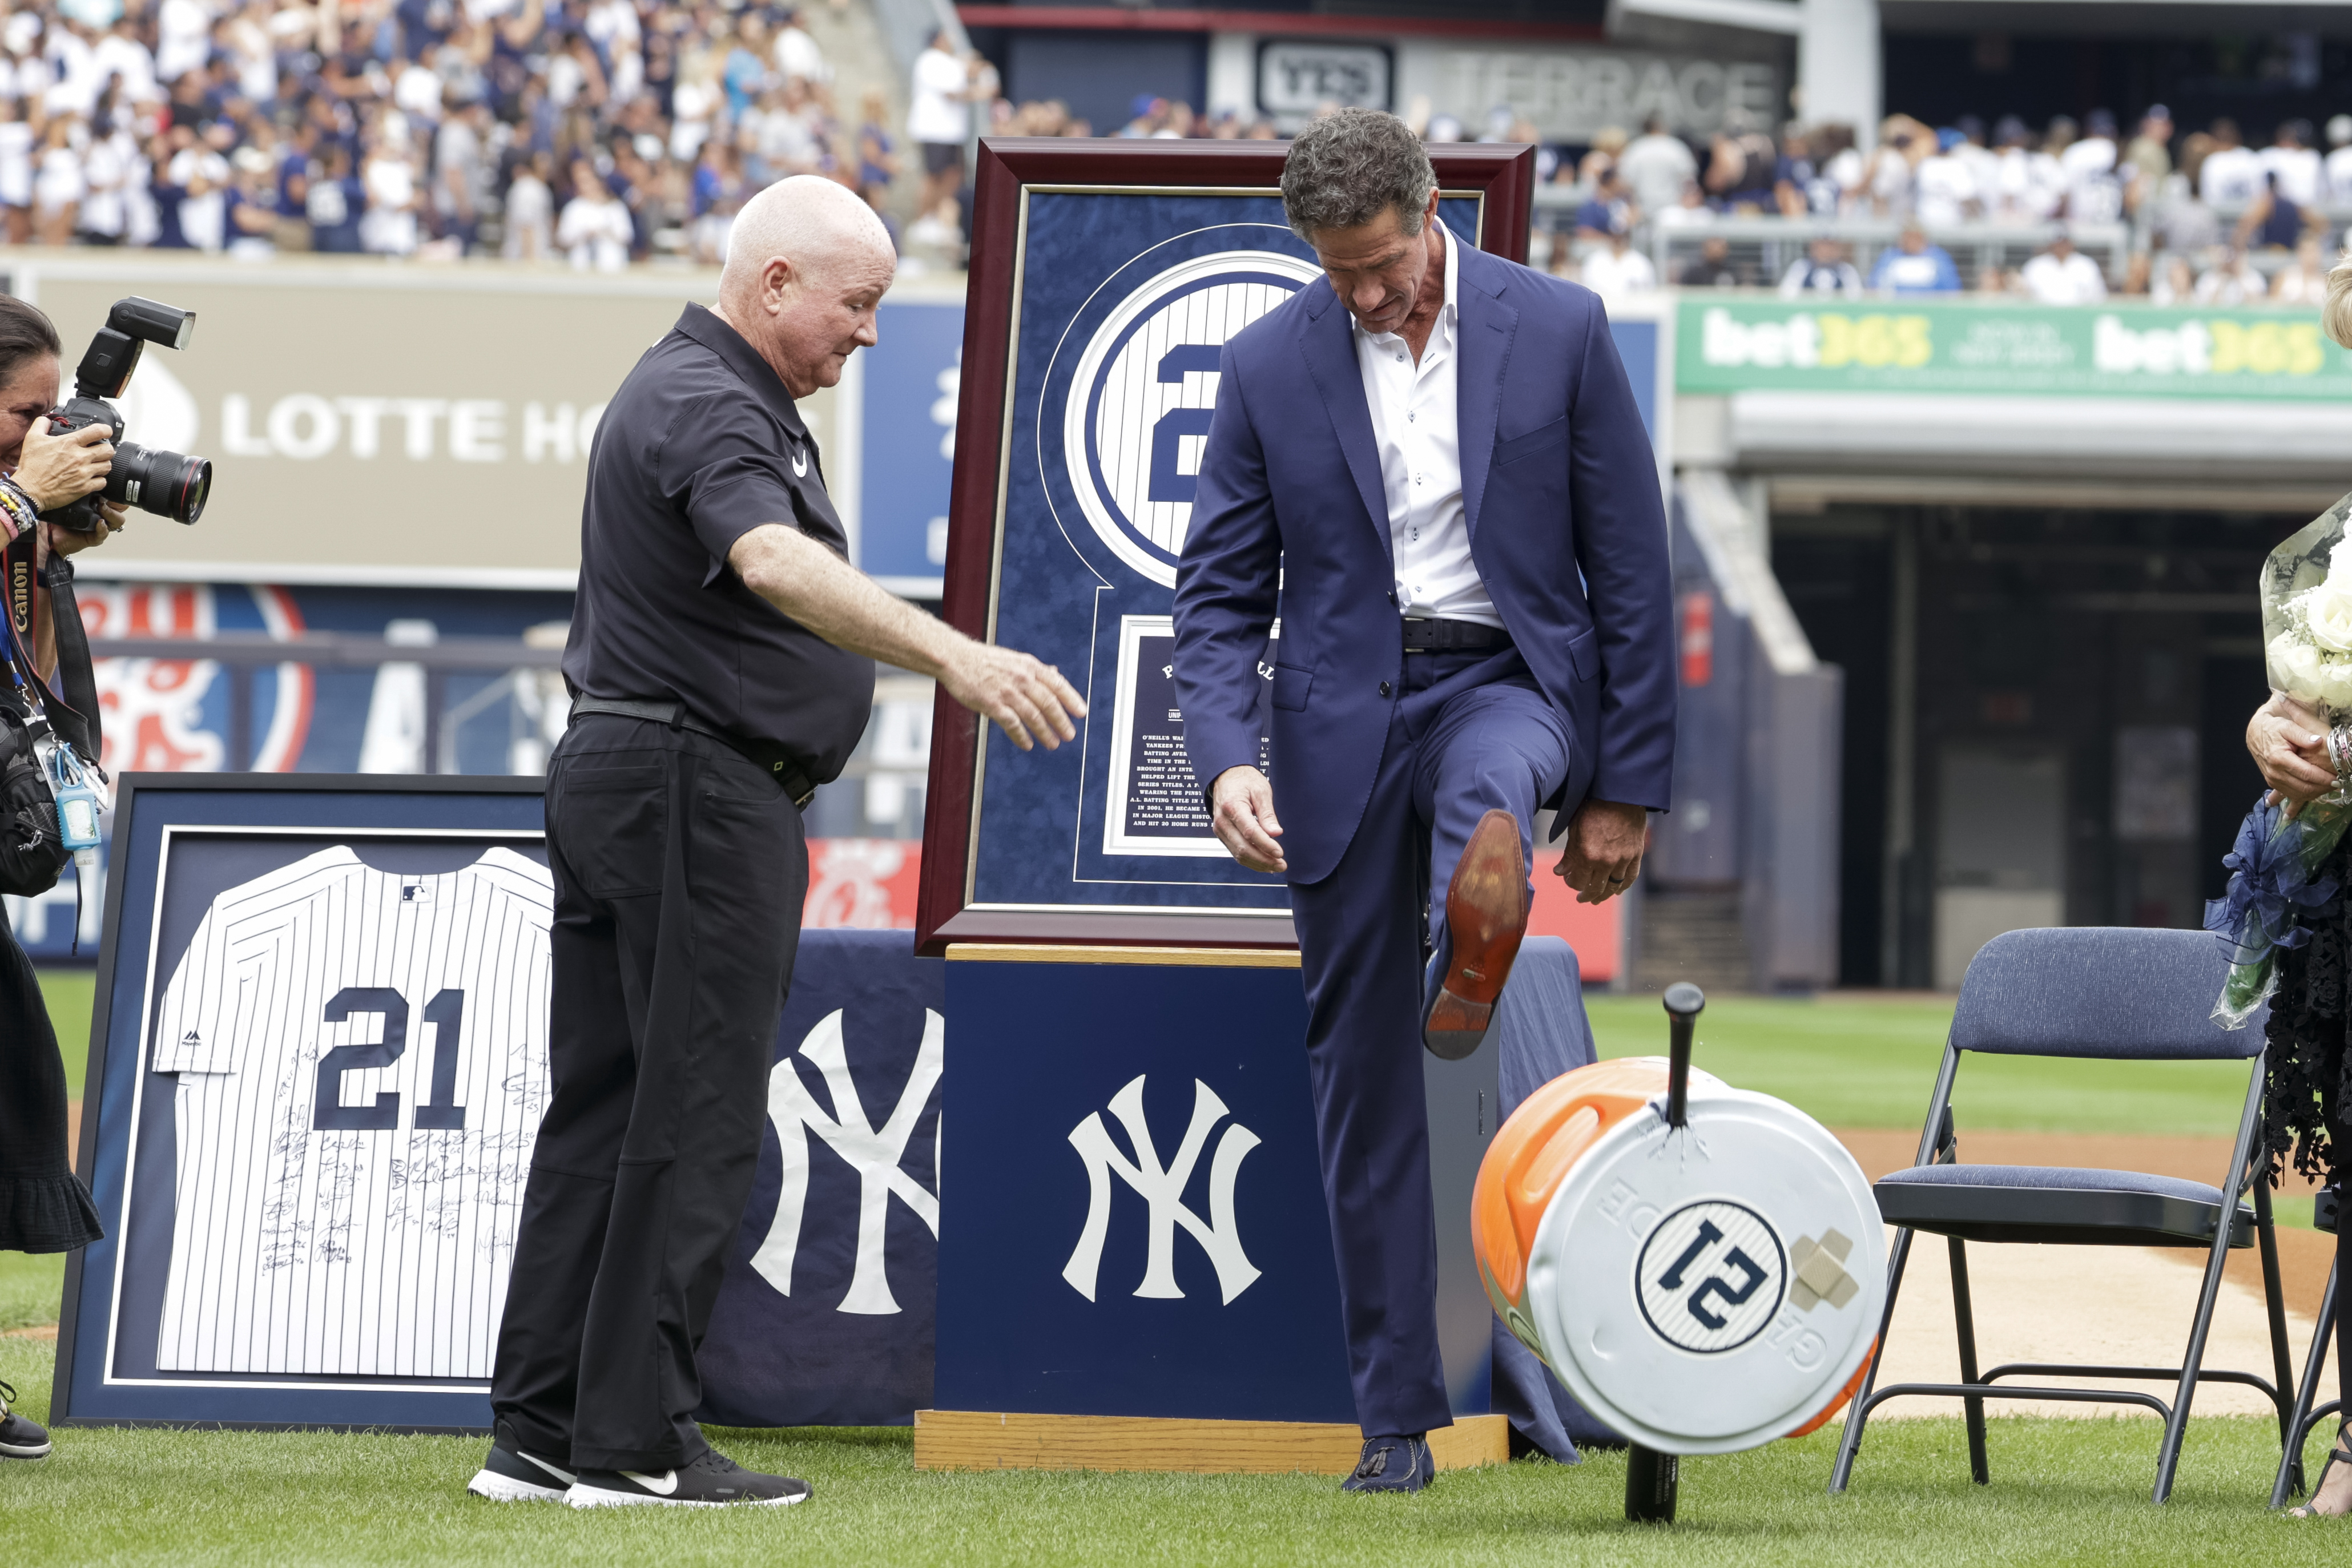 Paul O'Neill says Yankees holding Derek Jeter day this season is 'right  thing to do' – New York Daily News